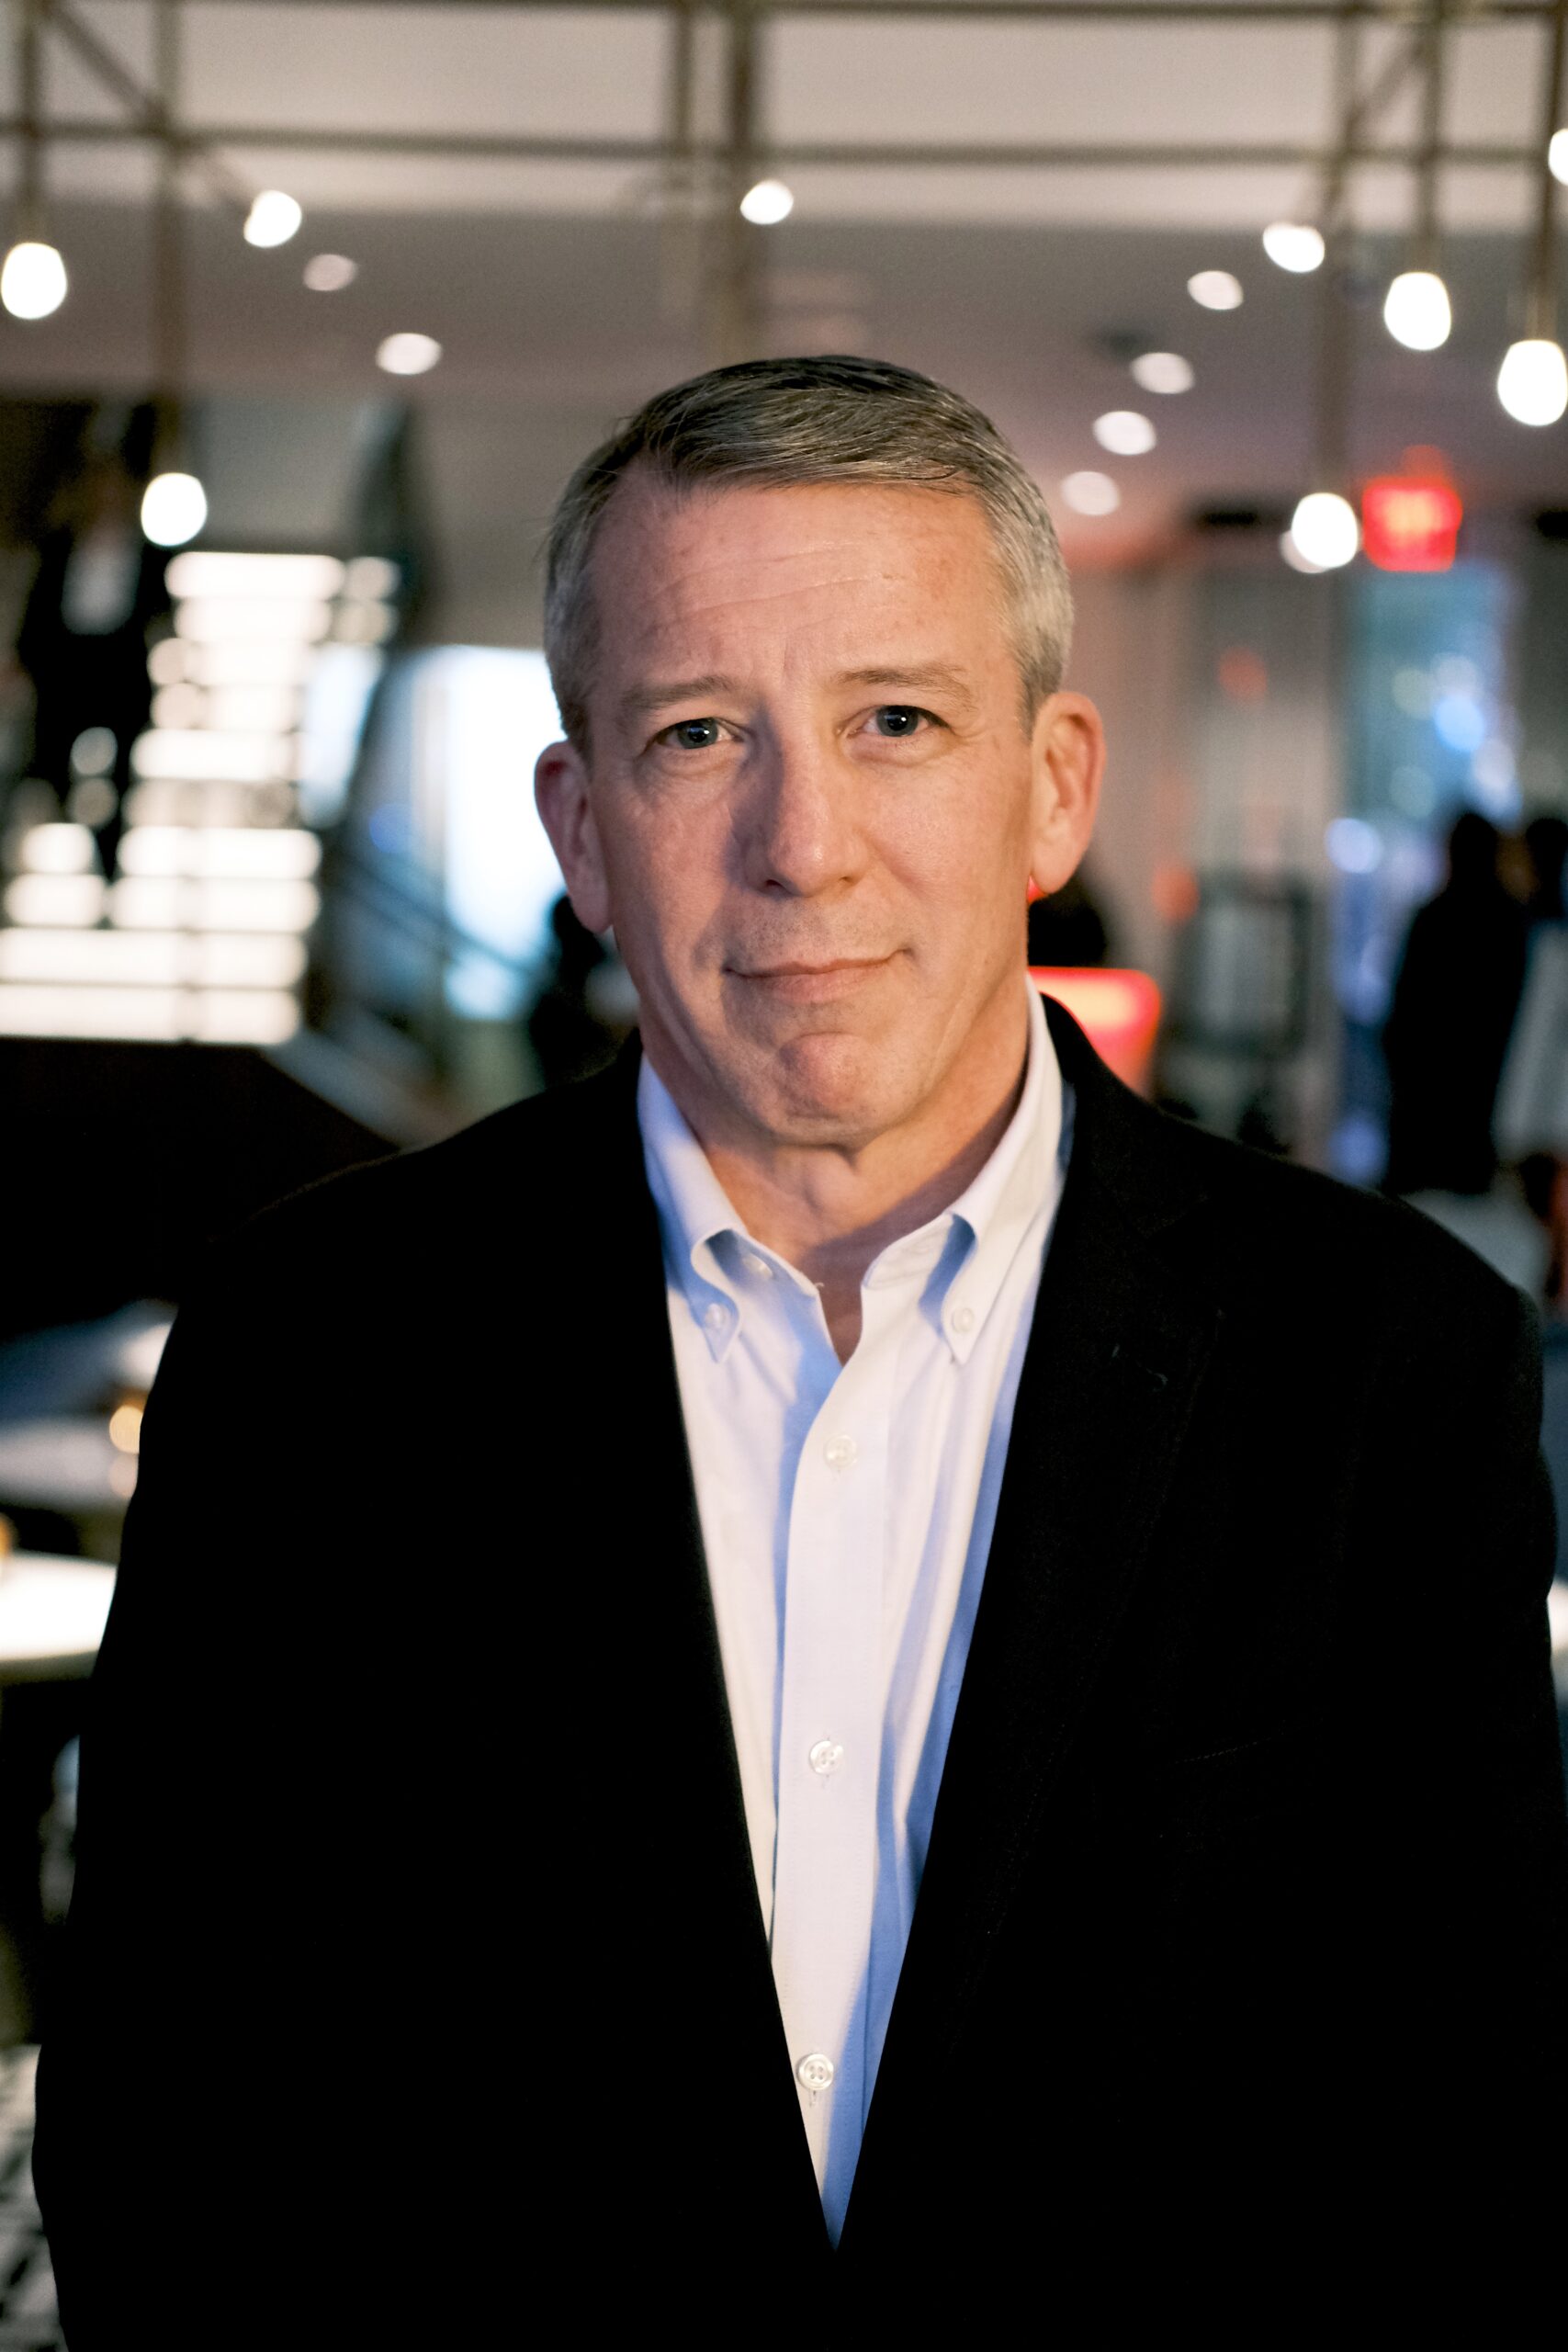 Headshot of Dan Ronayne standing in a dress shirt and coat with lights in the background.